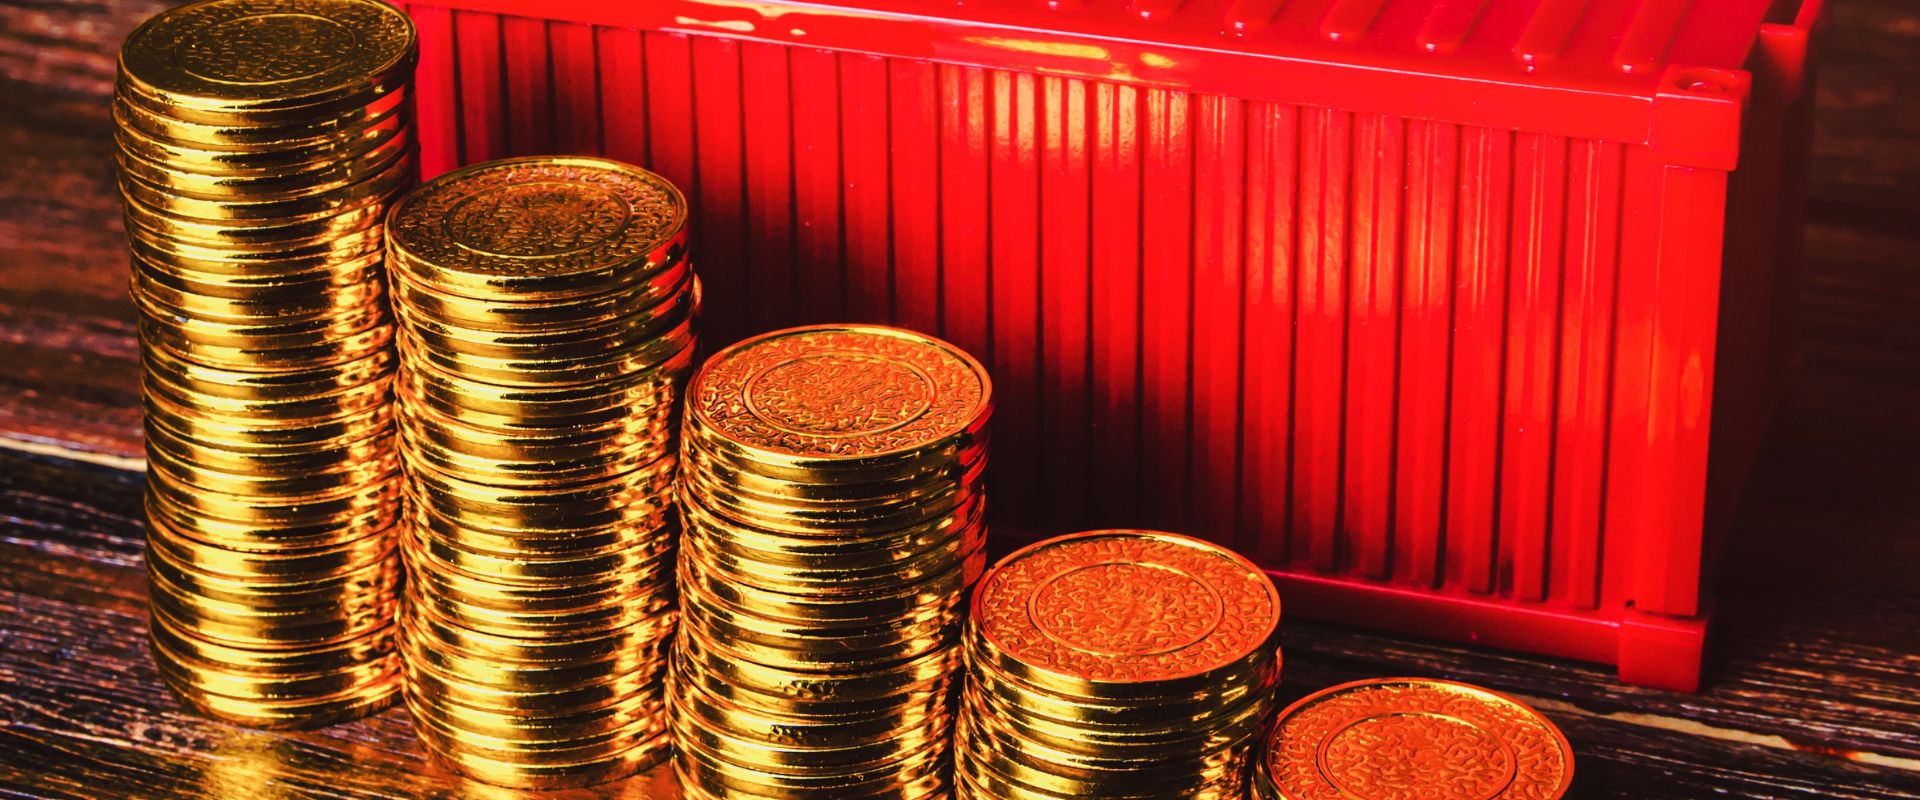 stack of gold coins and container on background